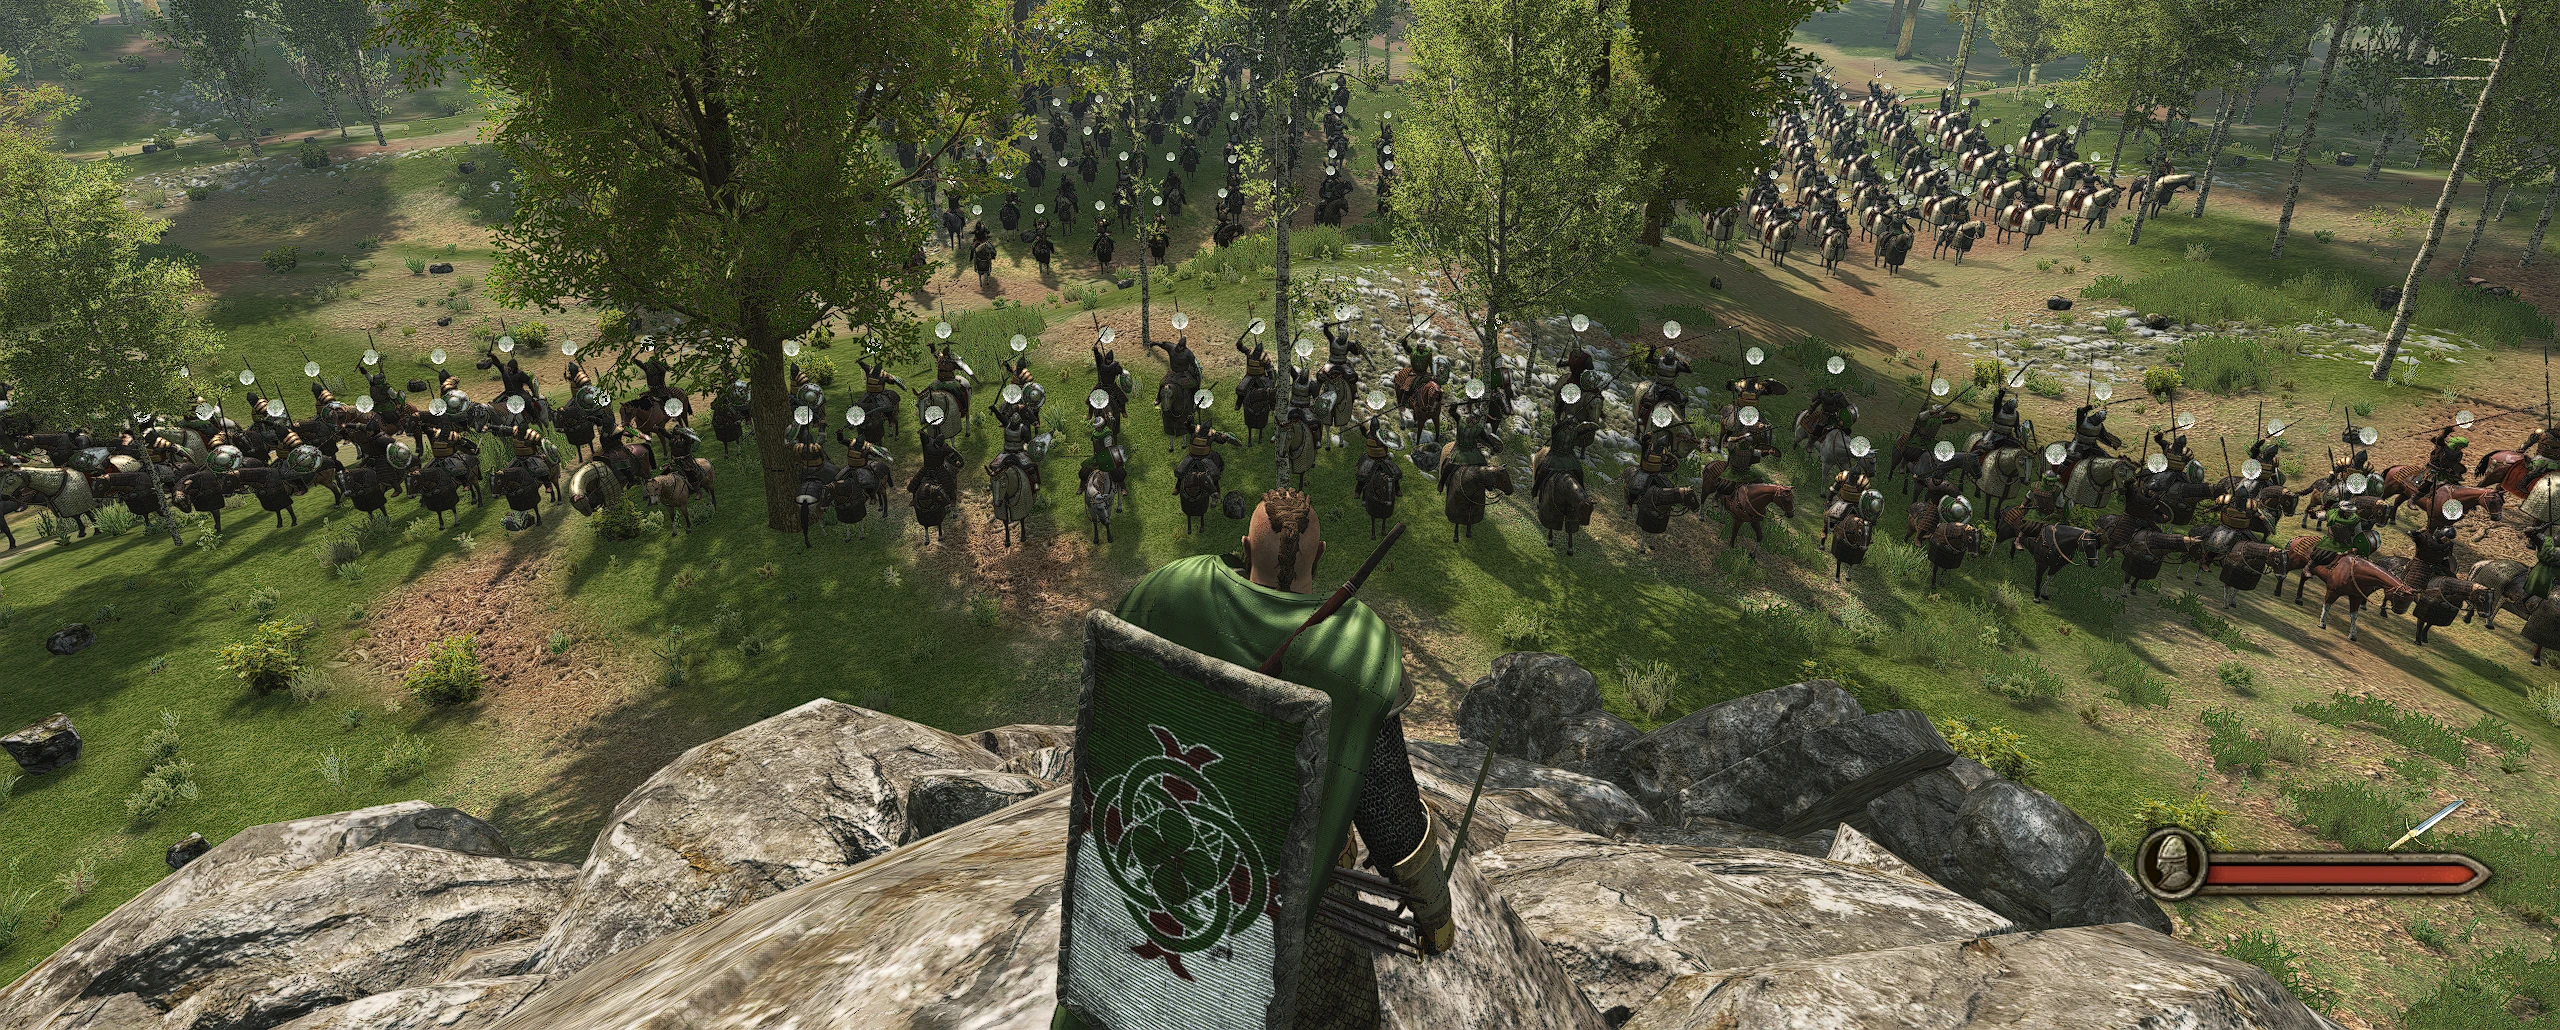 mount and blade shields